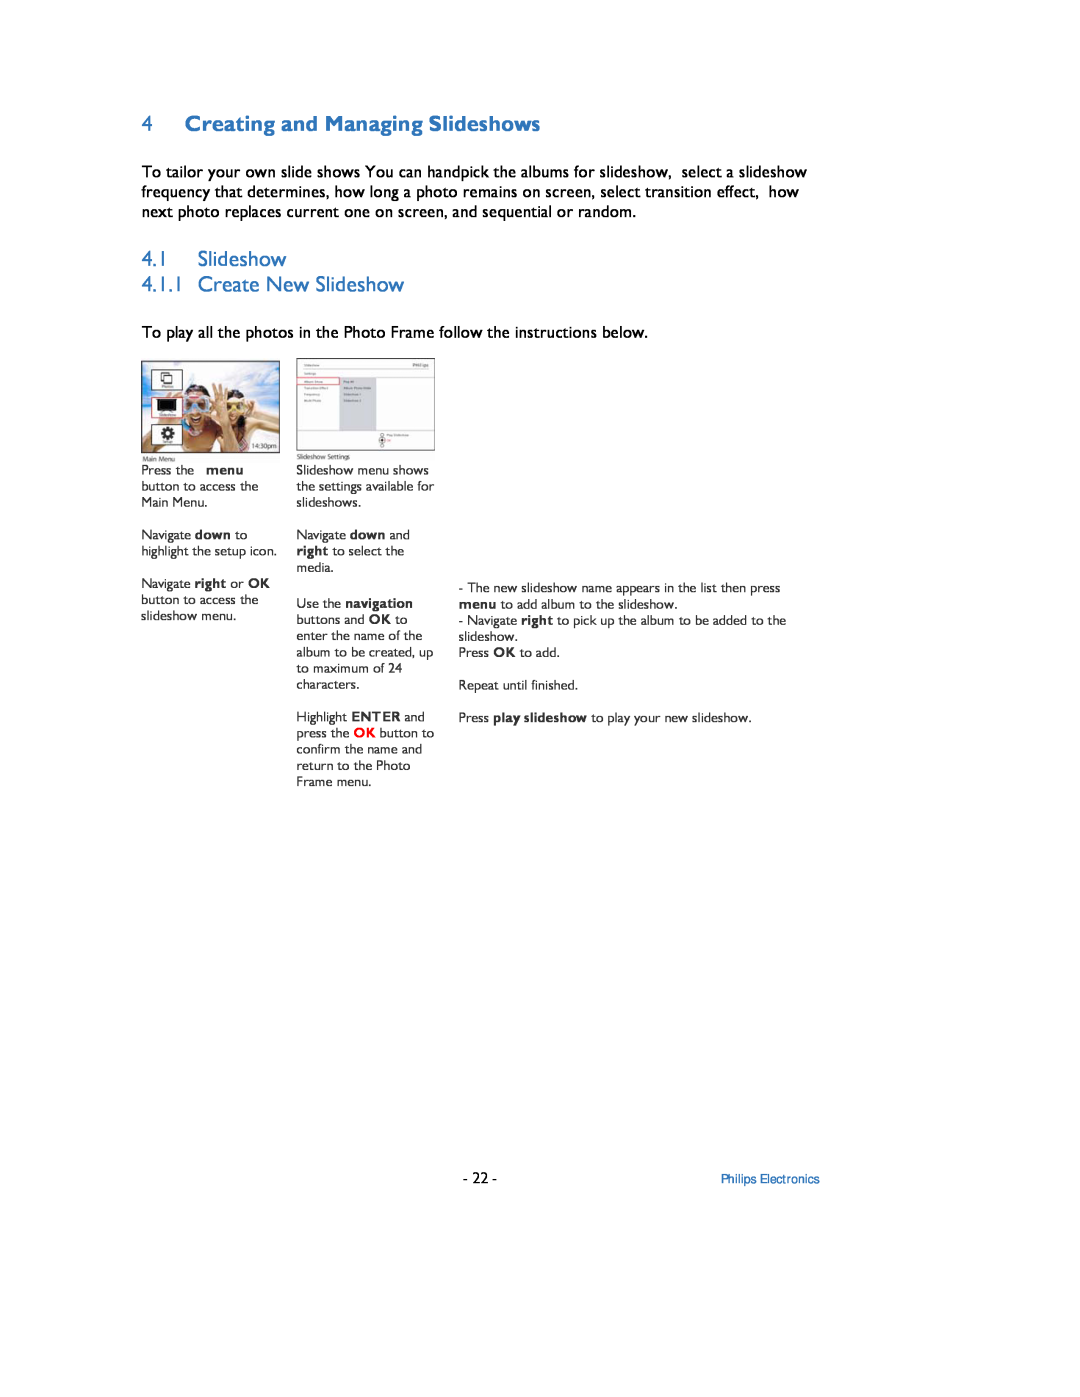 Philips 9FF2 user manual Creating and Managing Slideshows, Slideshow 4.1.1 Create New Slideshow 